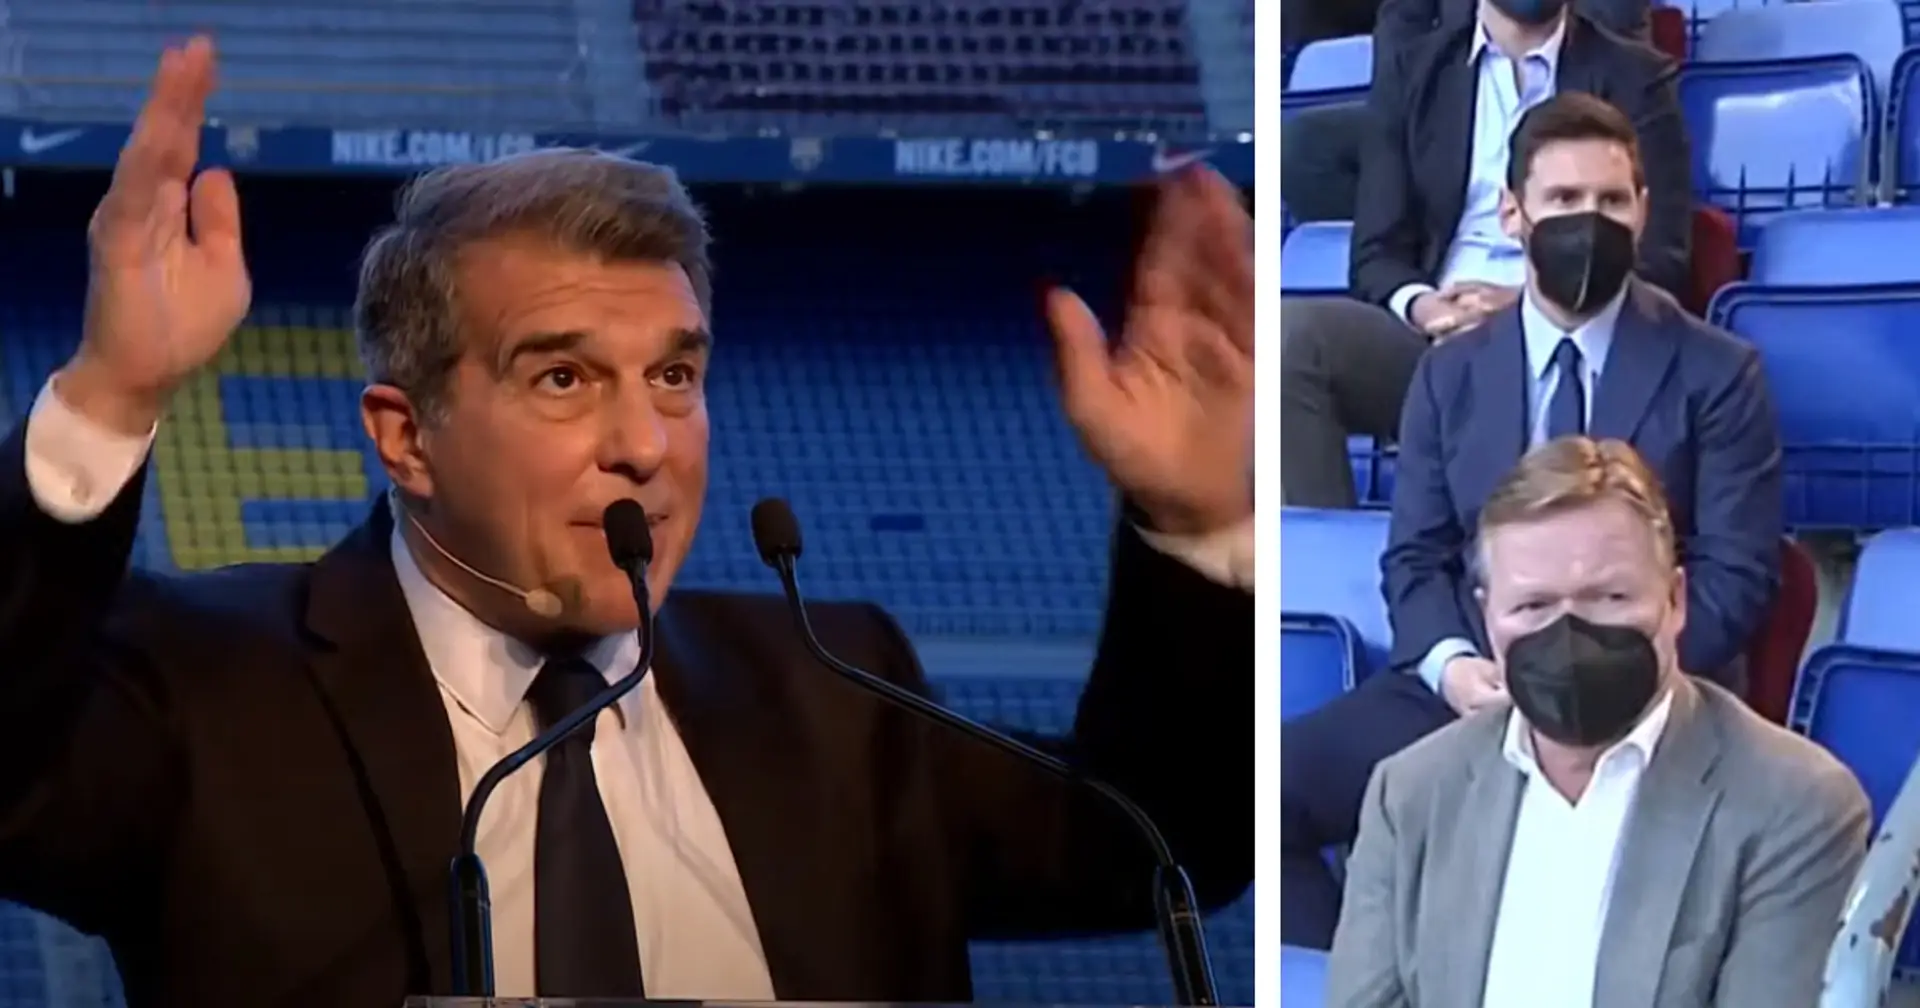 Messi, Koeman, Pique and many others spotted in attendance as Laporta gives speech